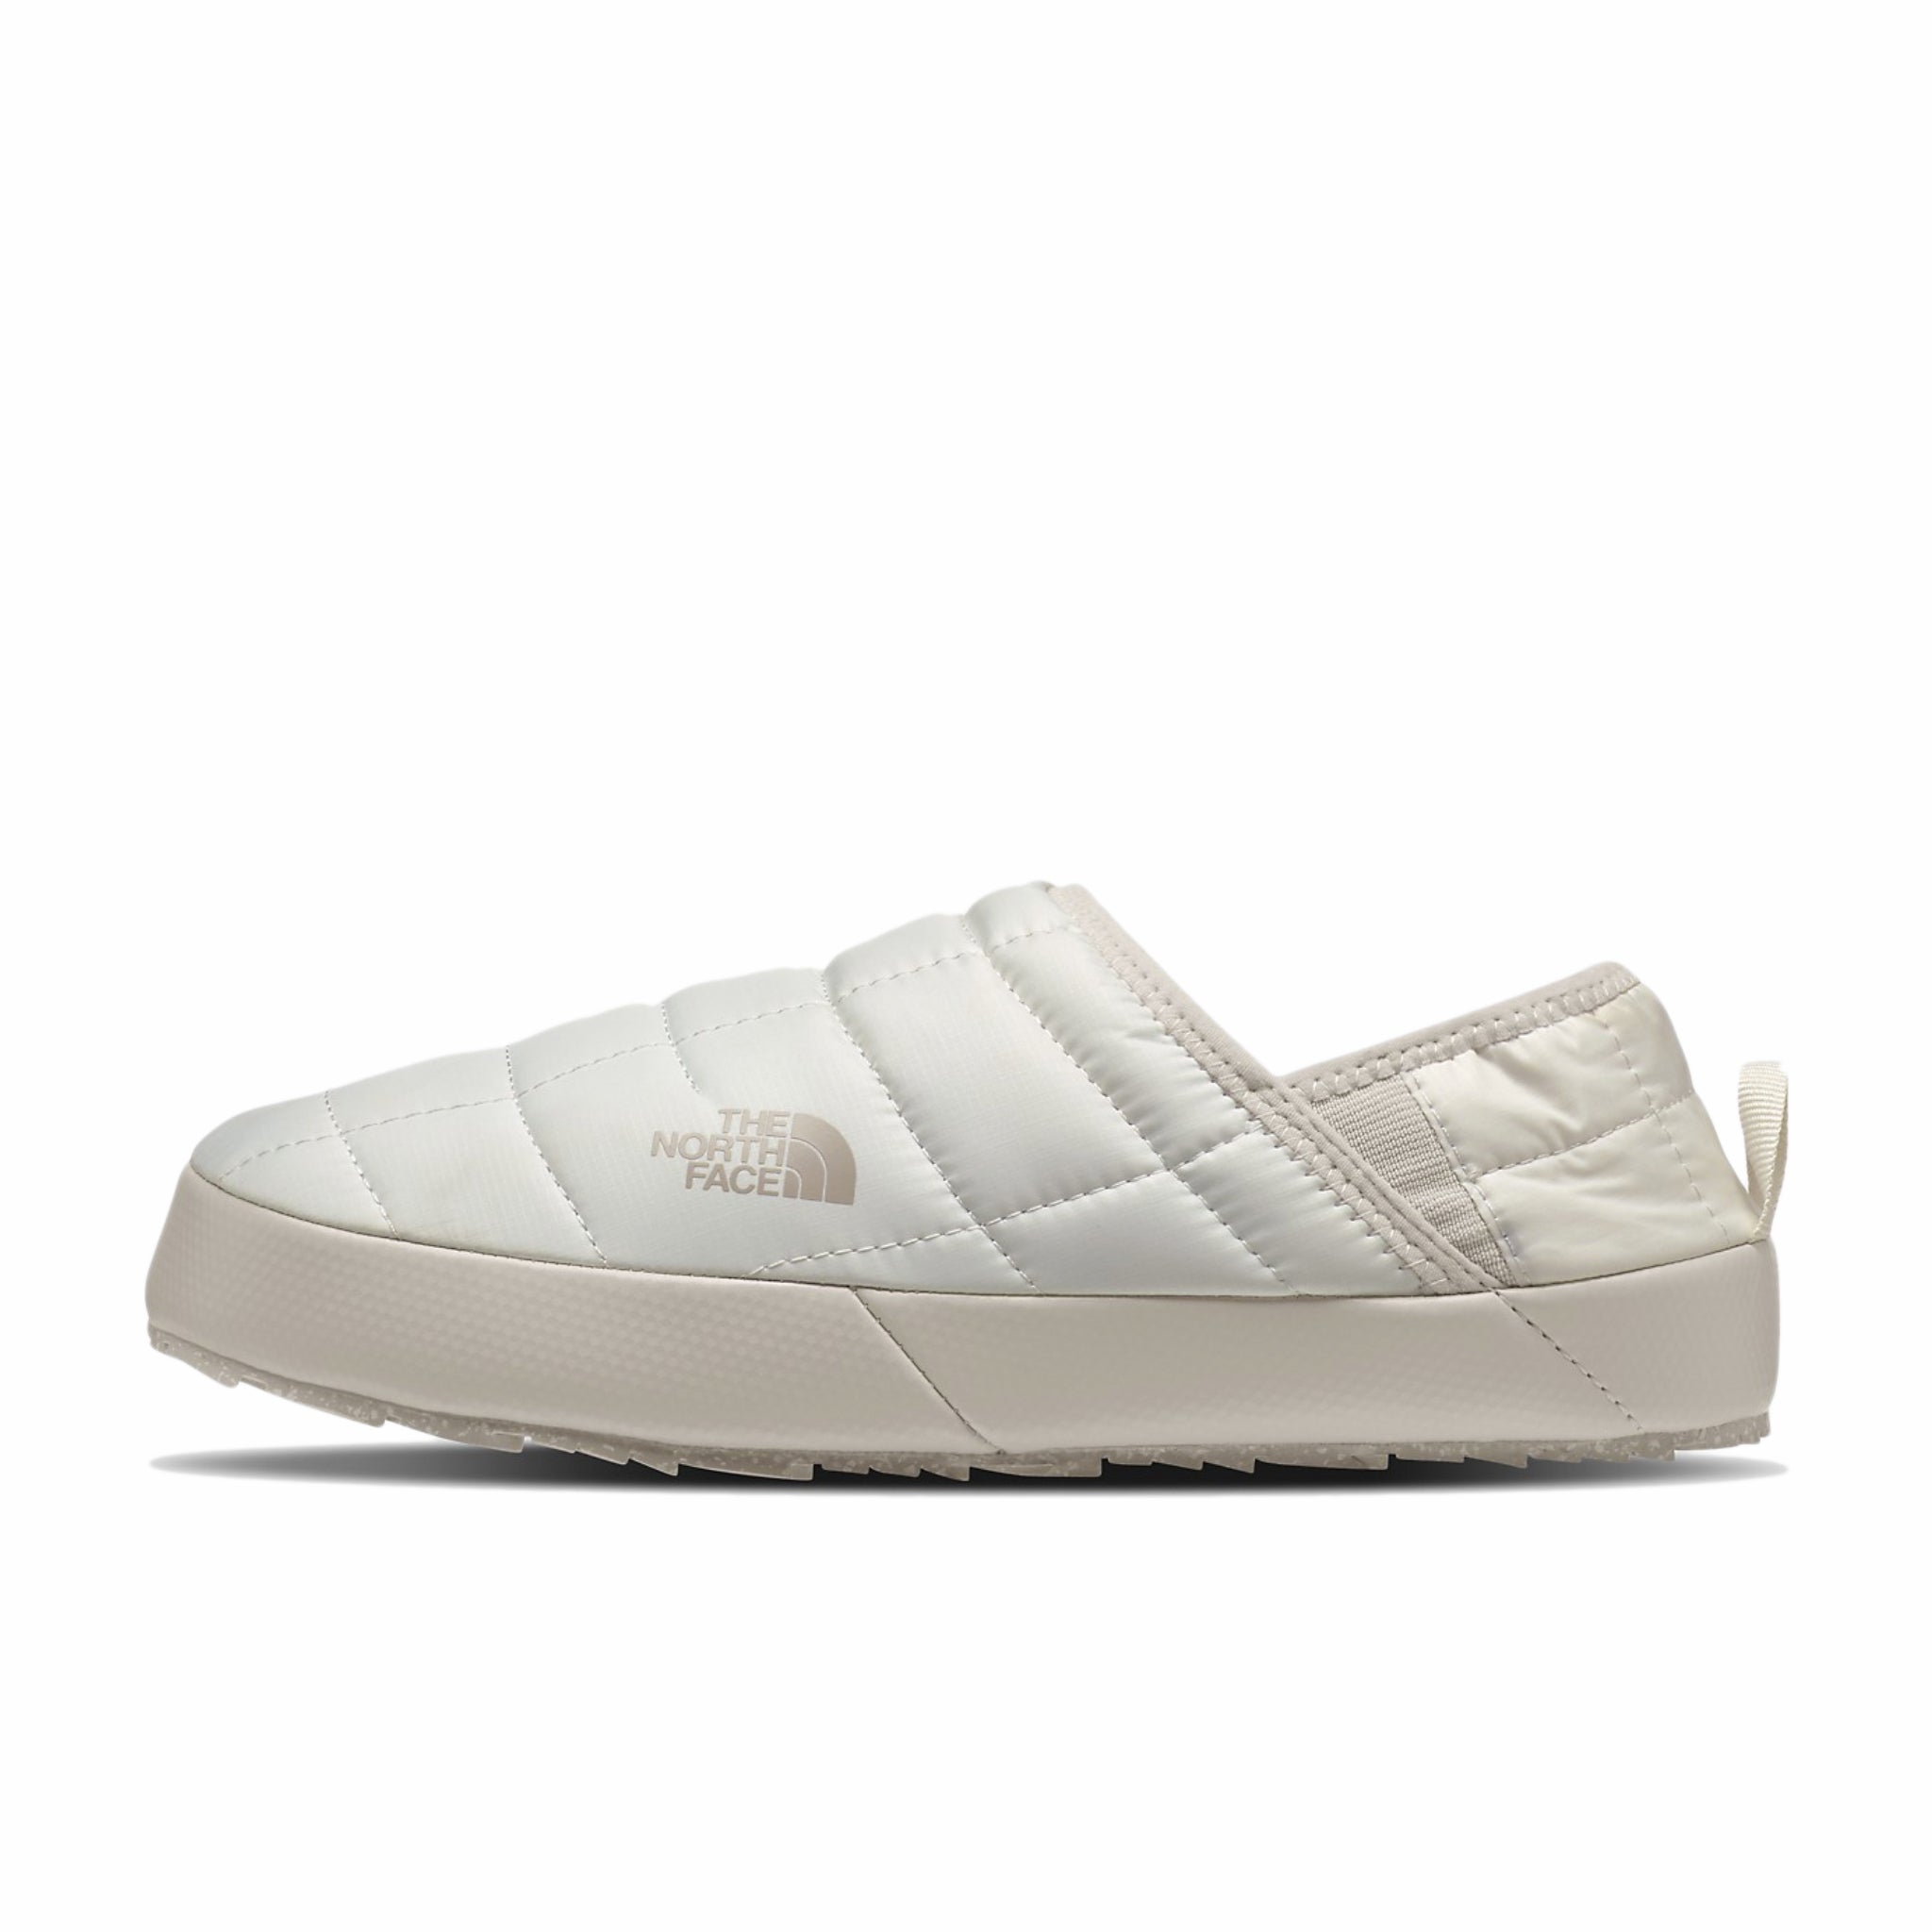 The North Face Women’s Thermoball Traction Mule V (Gardenia White/Silver Grey) - August Shop